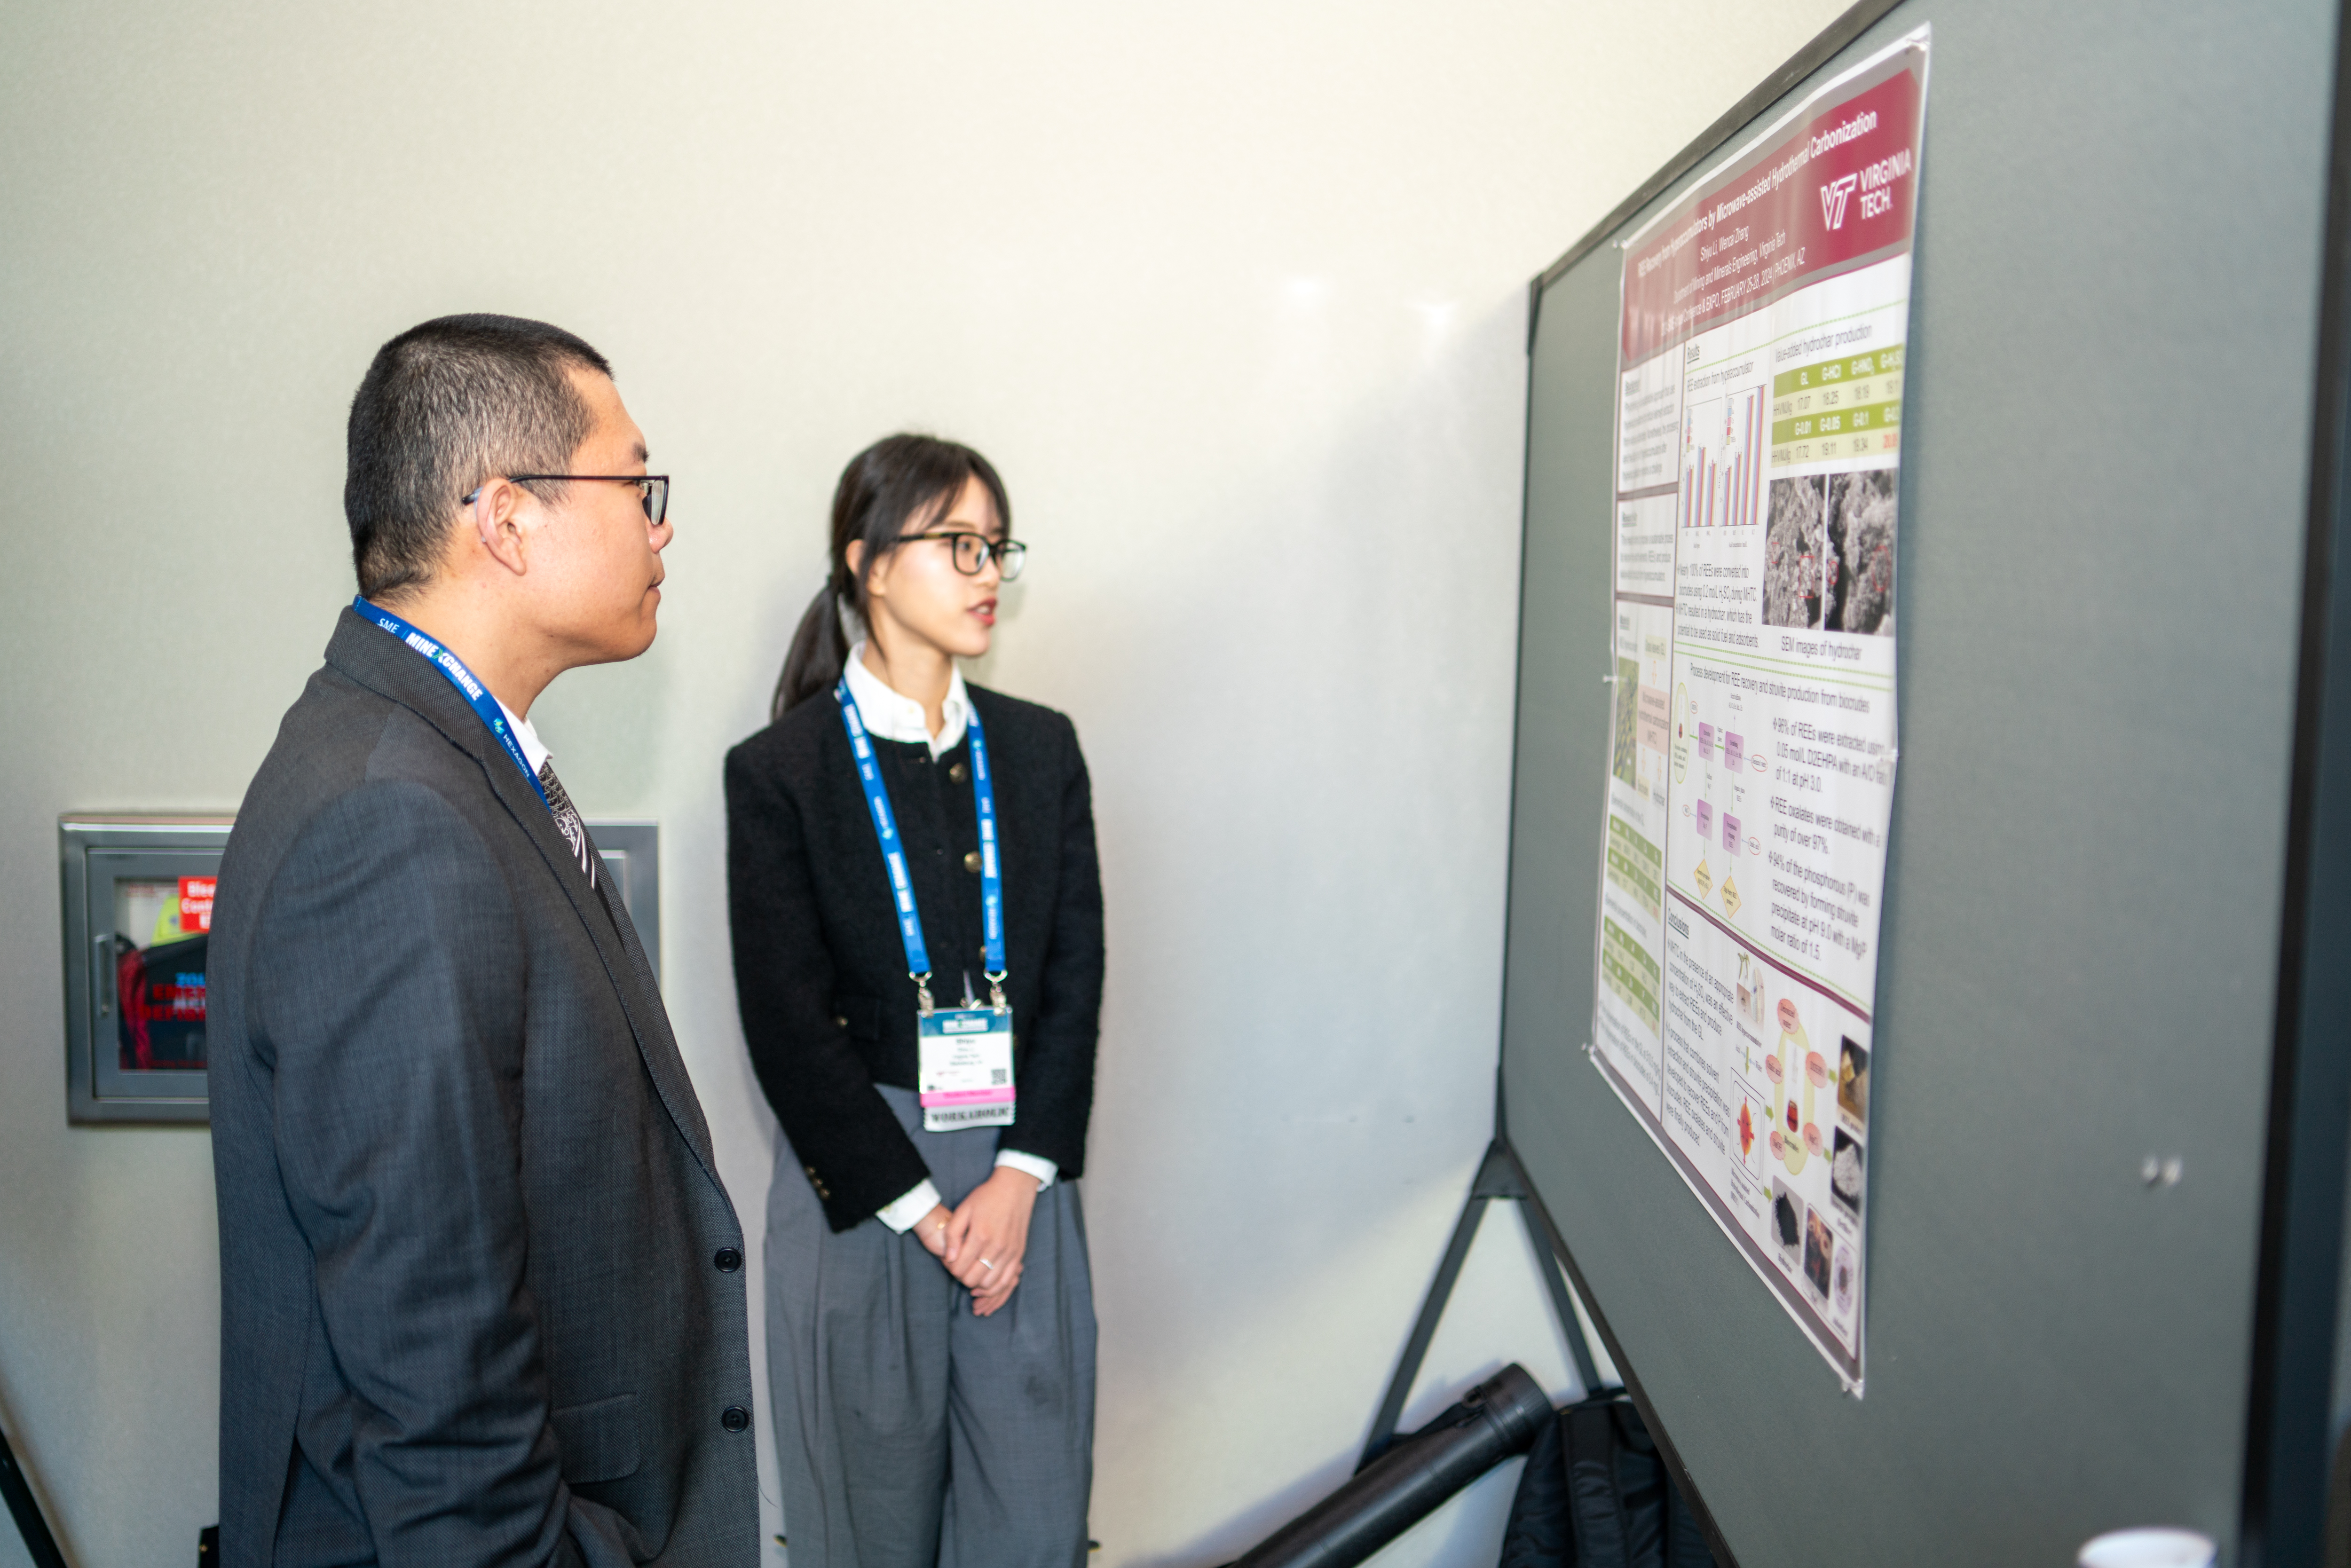 Two students looking at a research poster.